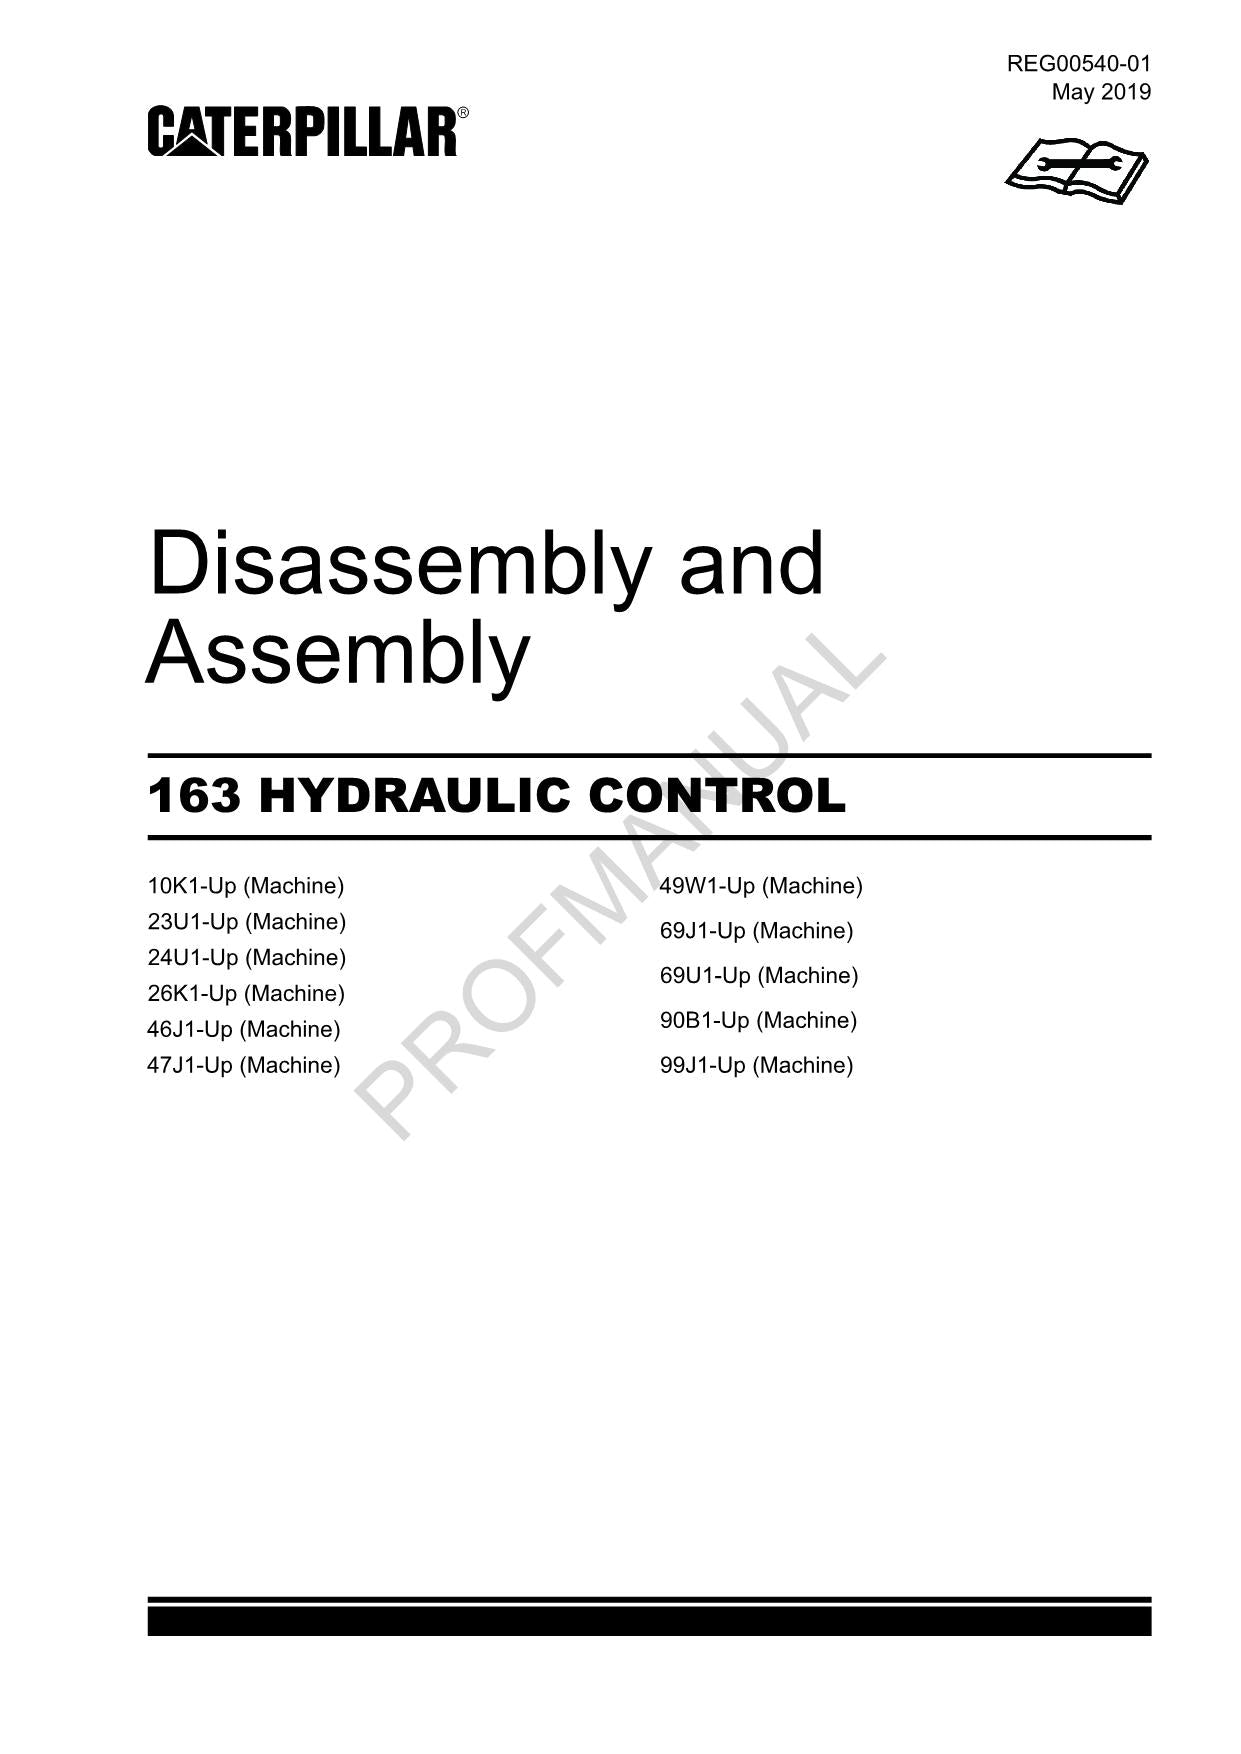 Caterpillar CAT 163 HYDRAULIC CONTROL Manual Disassembly Assembly